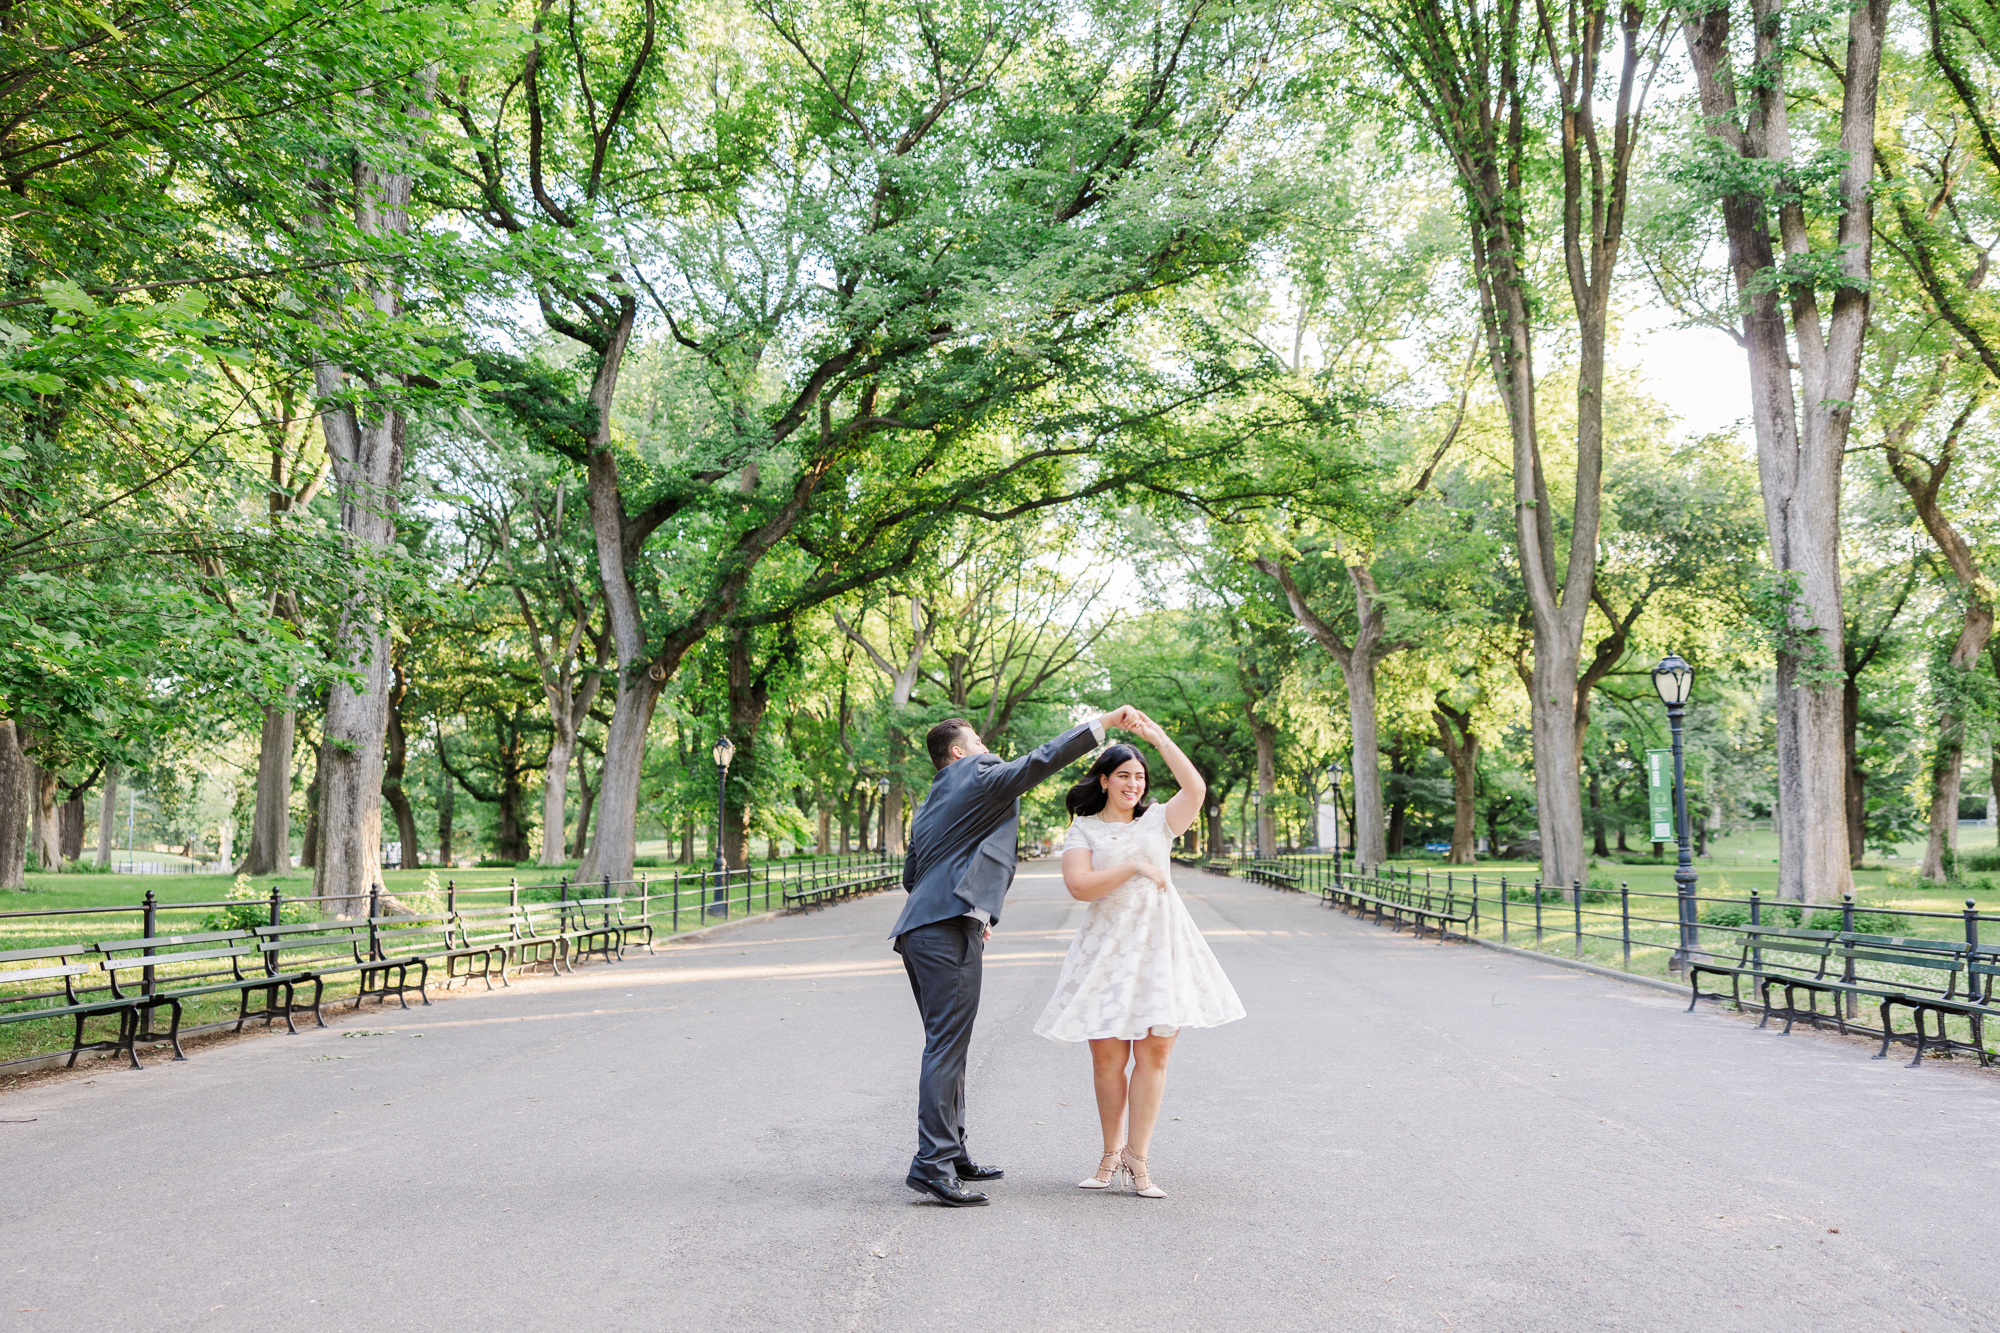 Jaw - Dropping Engagement Photos with Landmarks, New York